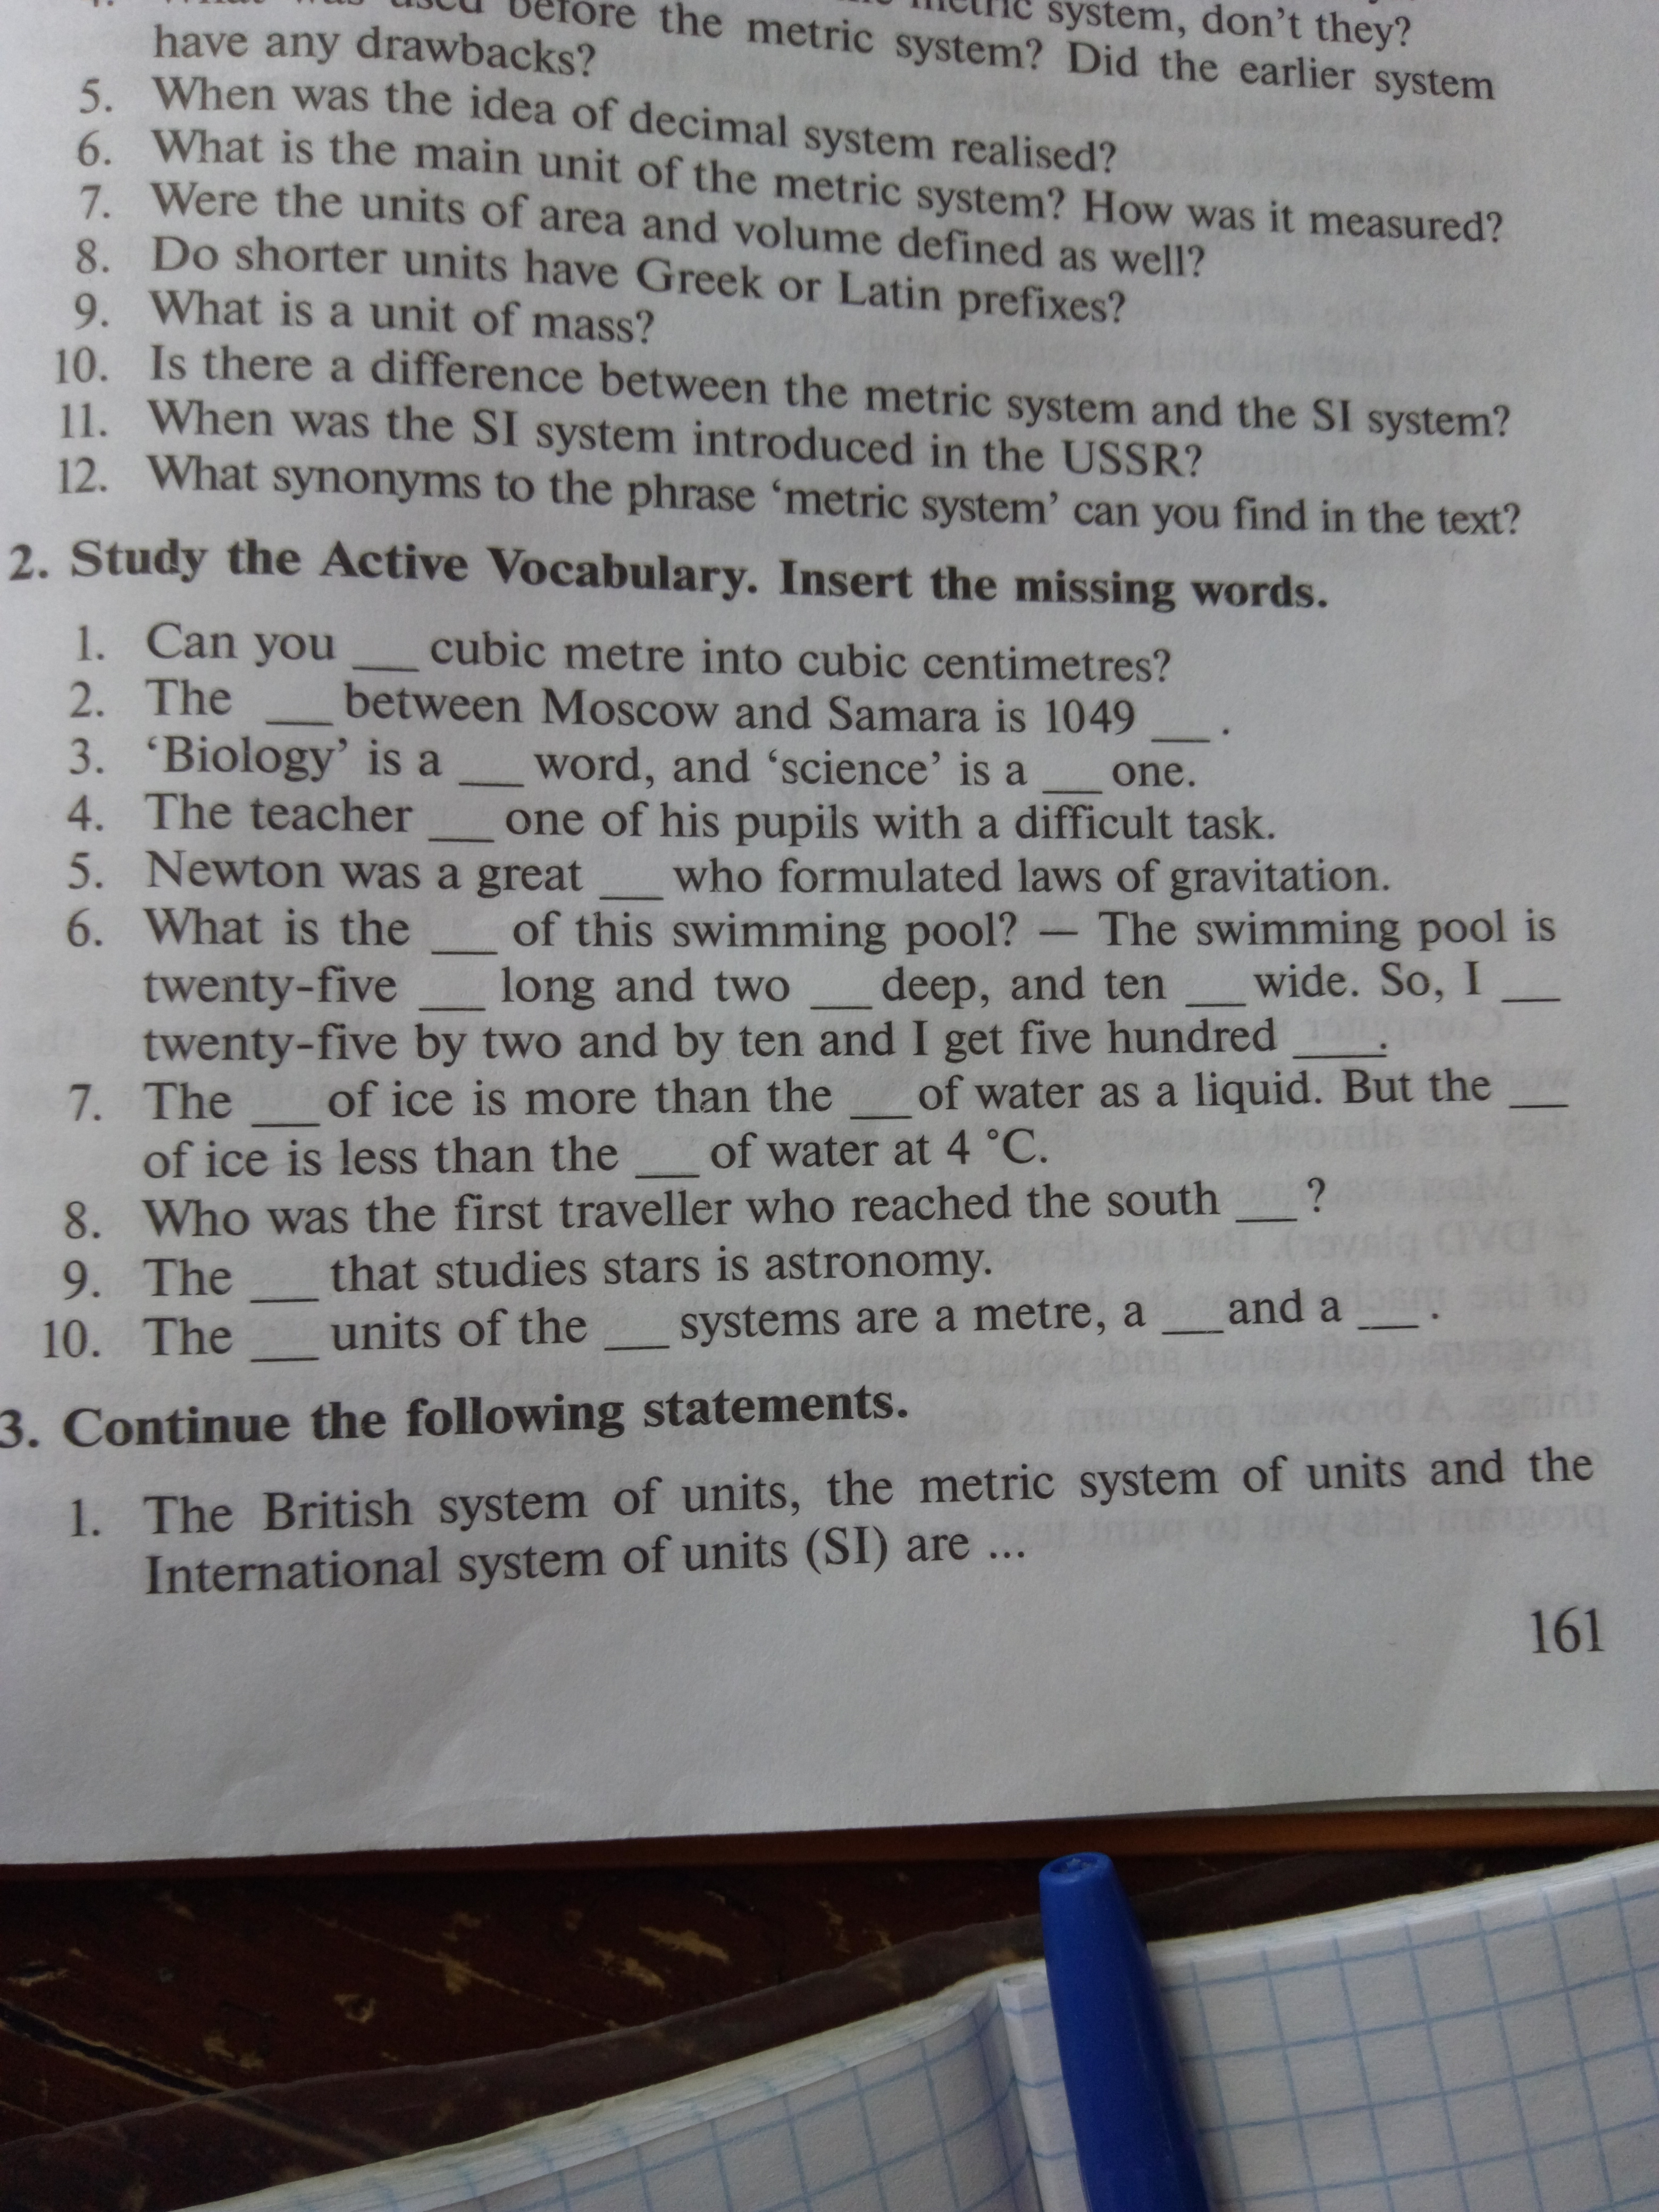 Study the active vocabulary insert. Study the Active Vocabulary Insert the missing Words. Study the Active Vocabulary Insert the missing Words this House belongs to Culture ответы. Insert the missing Words. Study the Active Vocabulary Insert the missing Words this House belongs to ответы.